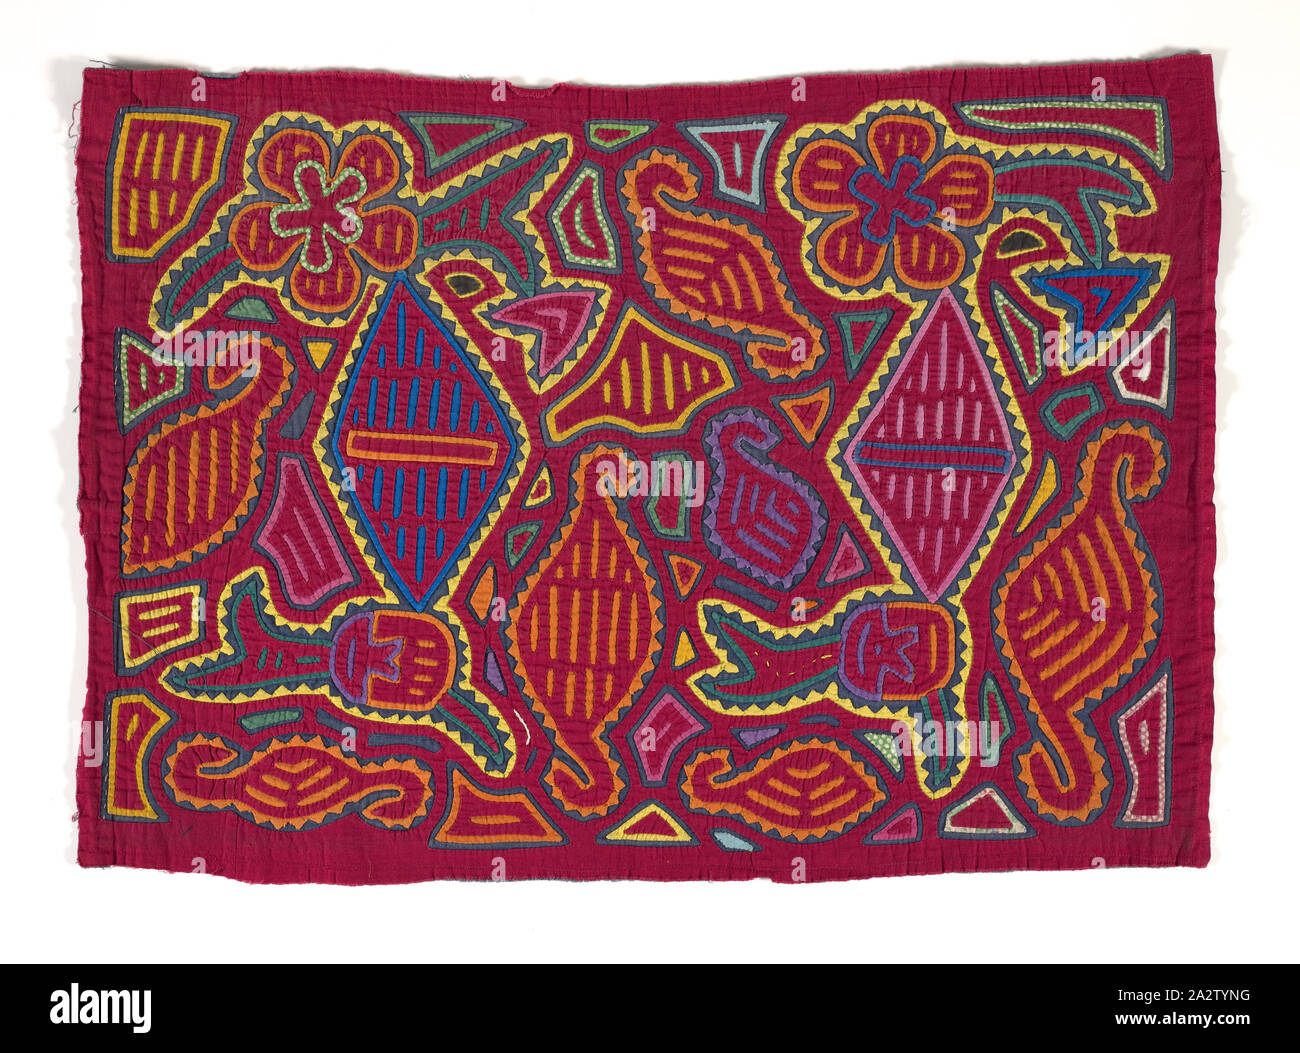 shirt panel (mola), Kuna people, about 1950s, appliqued cotton, 16-7/8 x 23-3/4 in., Textile and Fashion Arts Stock Photo